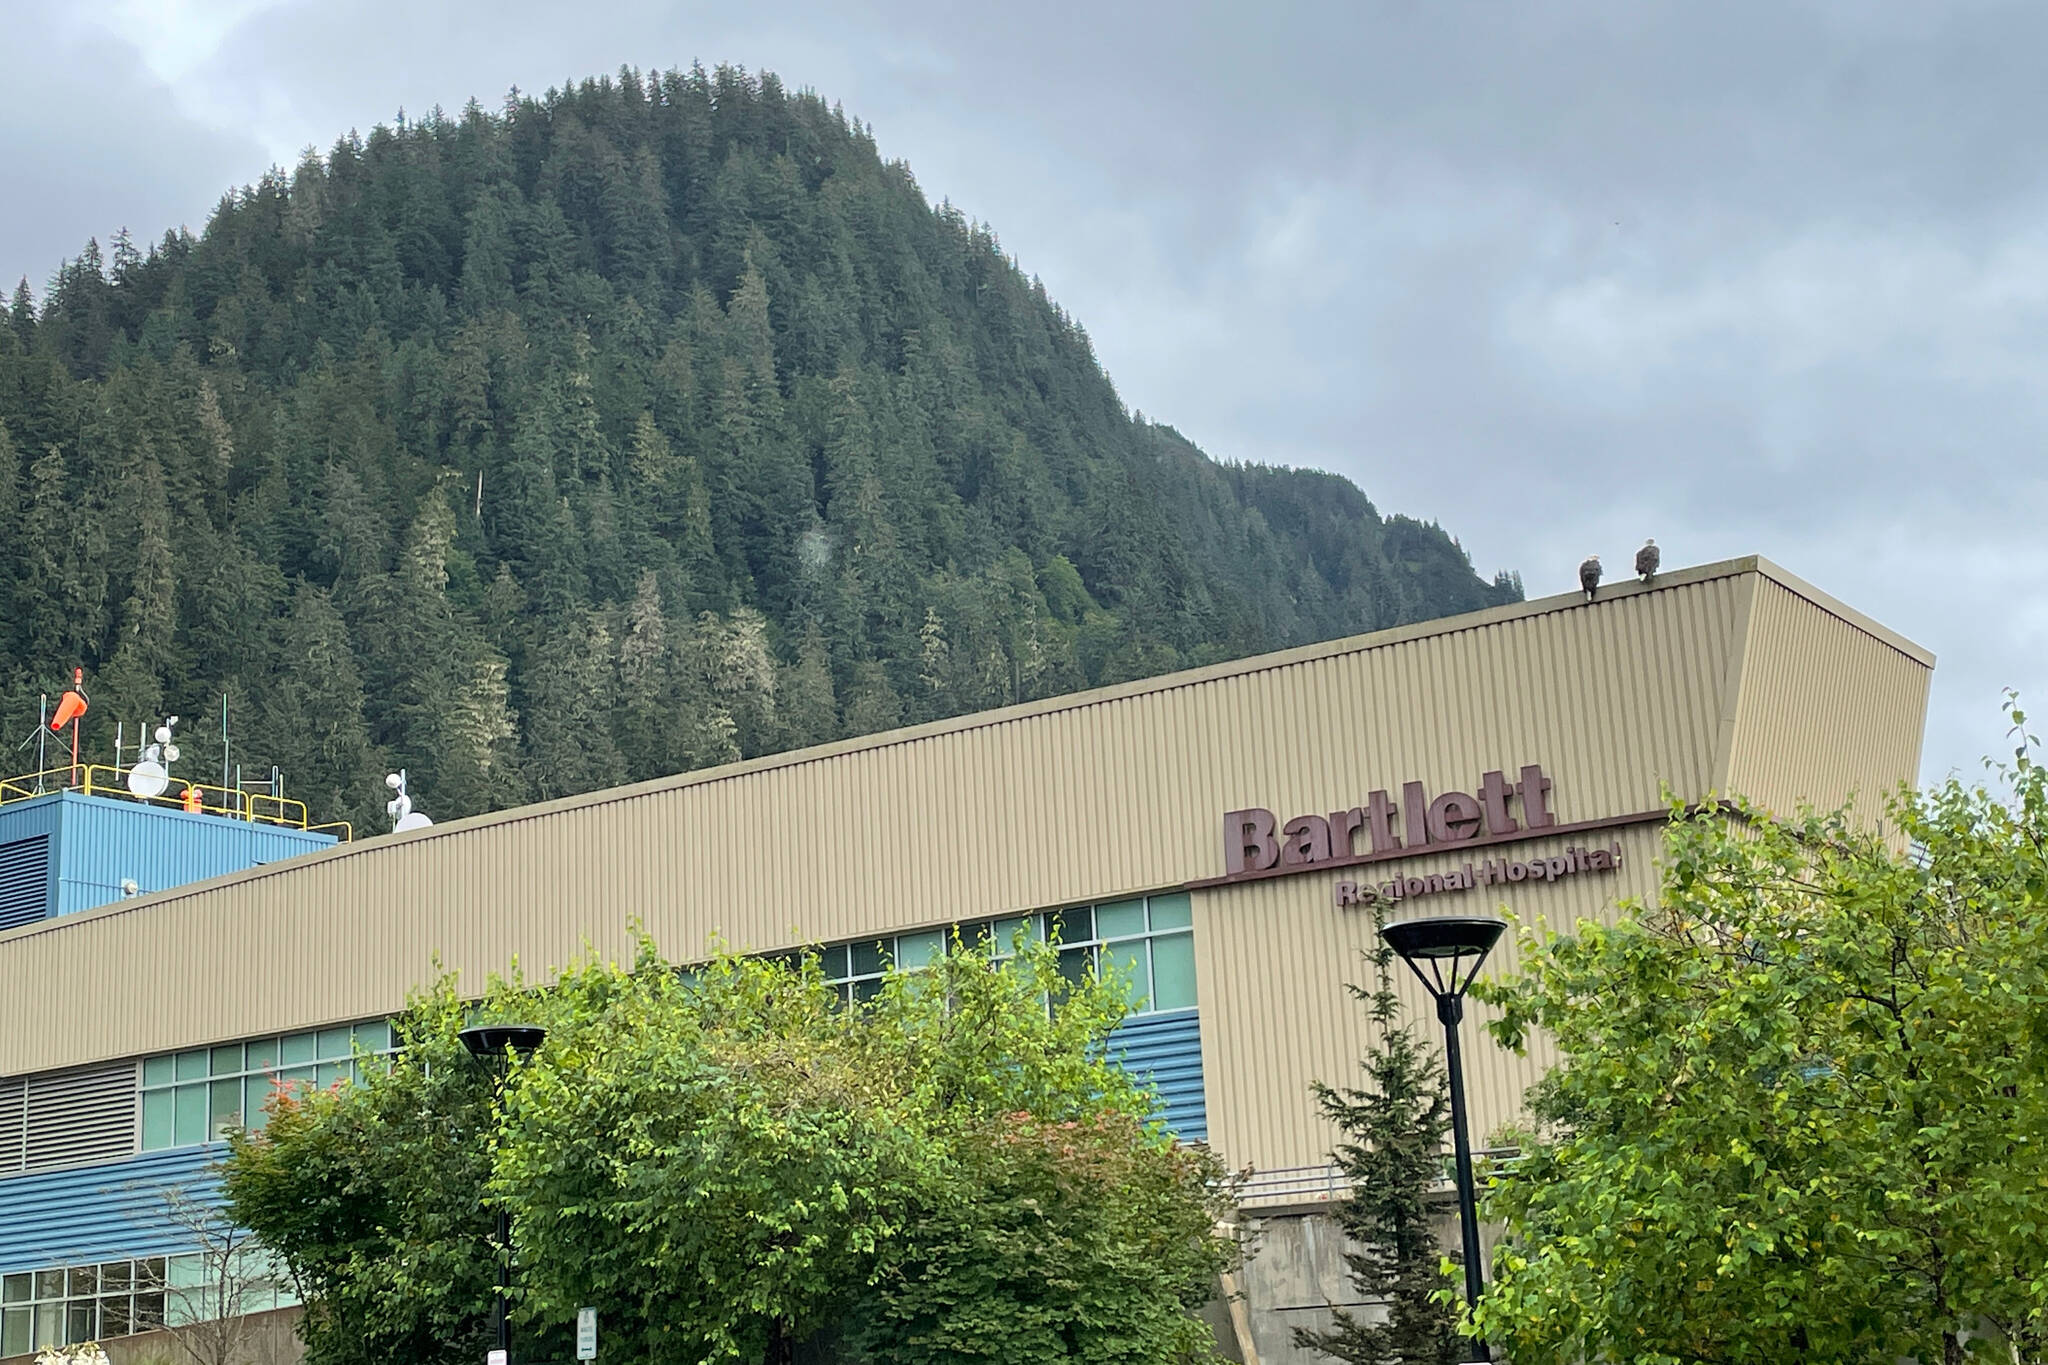 This photo shows Bartlett Regional Hospital, which was among the 20 facilities for which the state activated crisis standards of care on Saturday. (Michael S. Lockett / Juneau Empire)